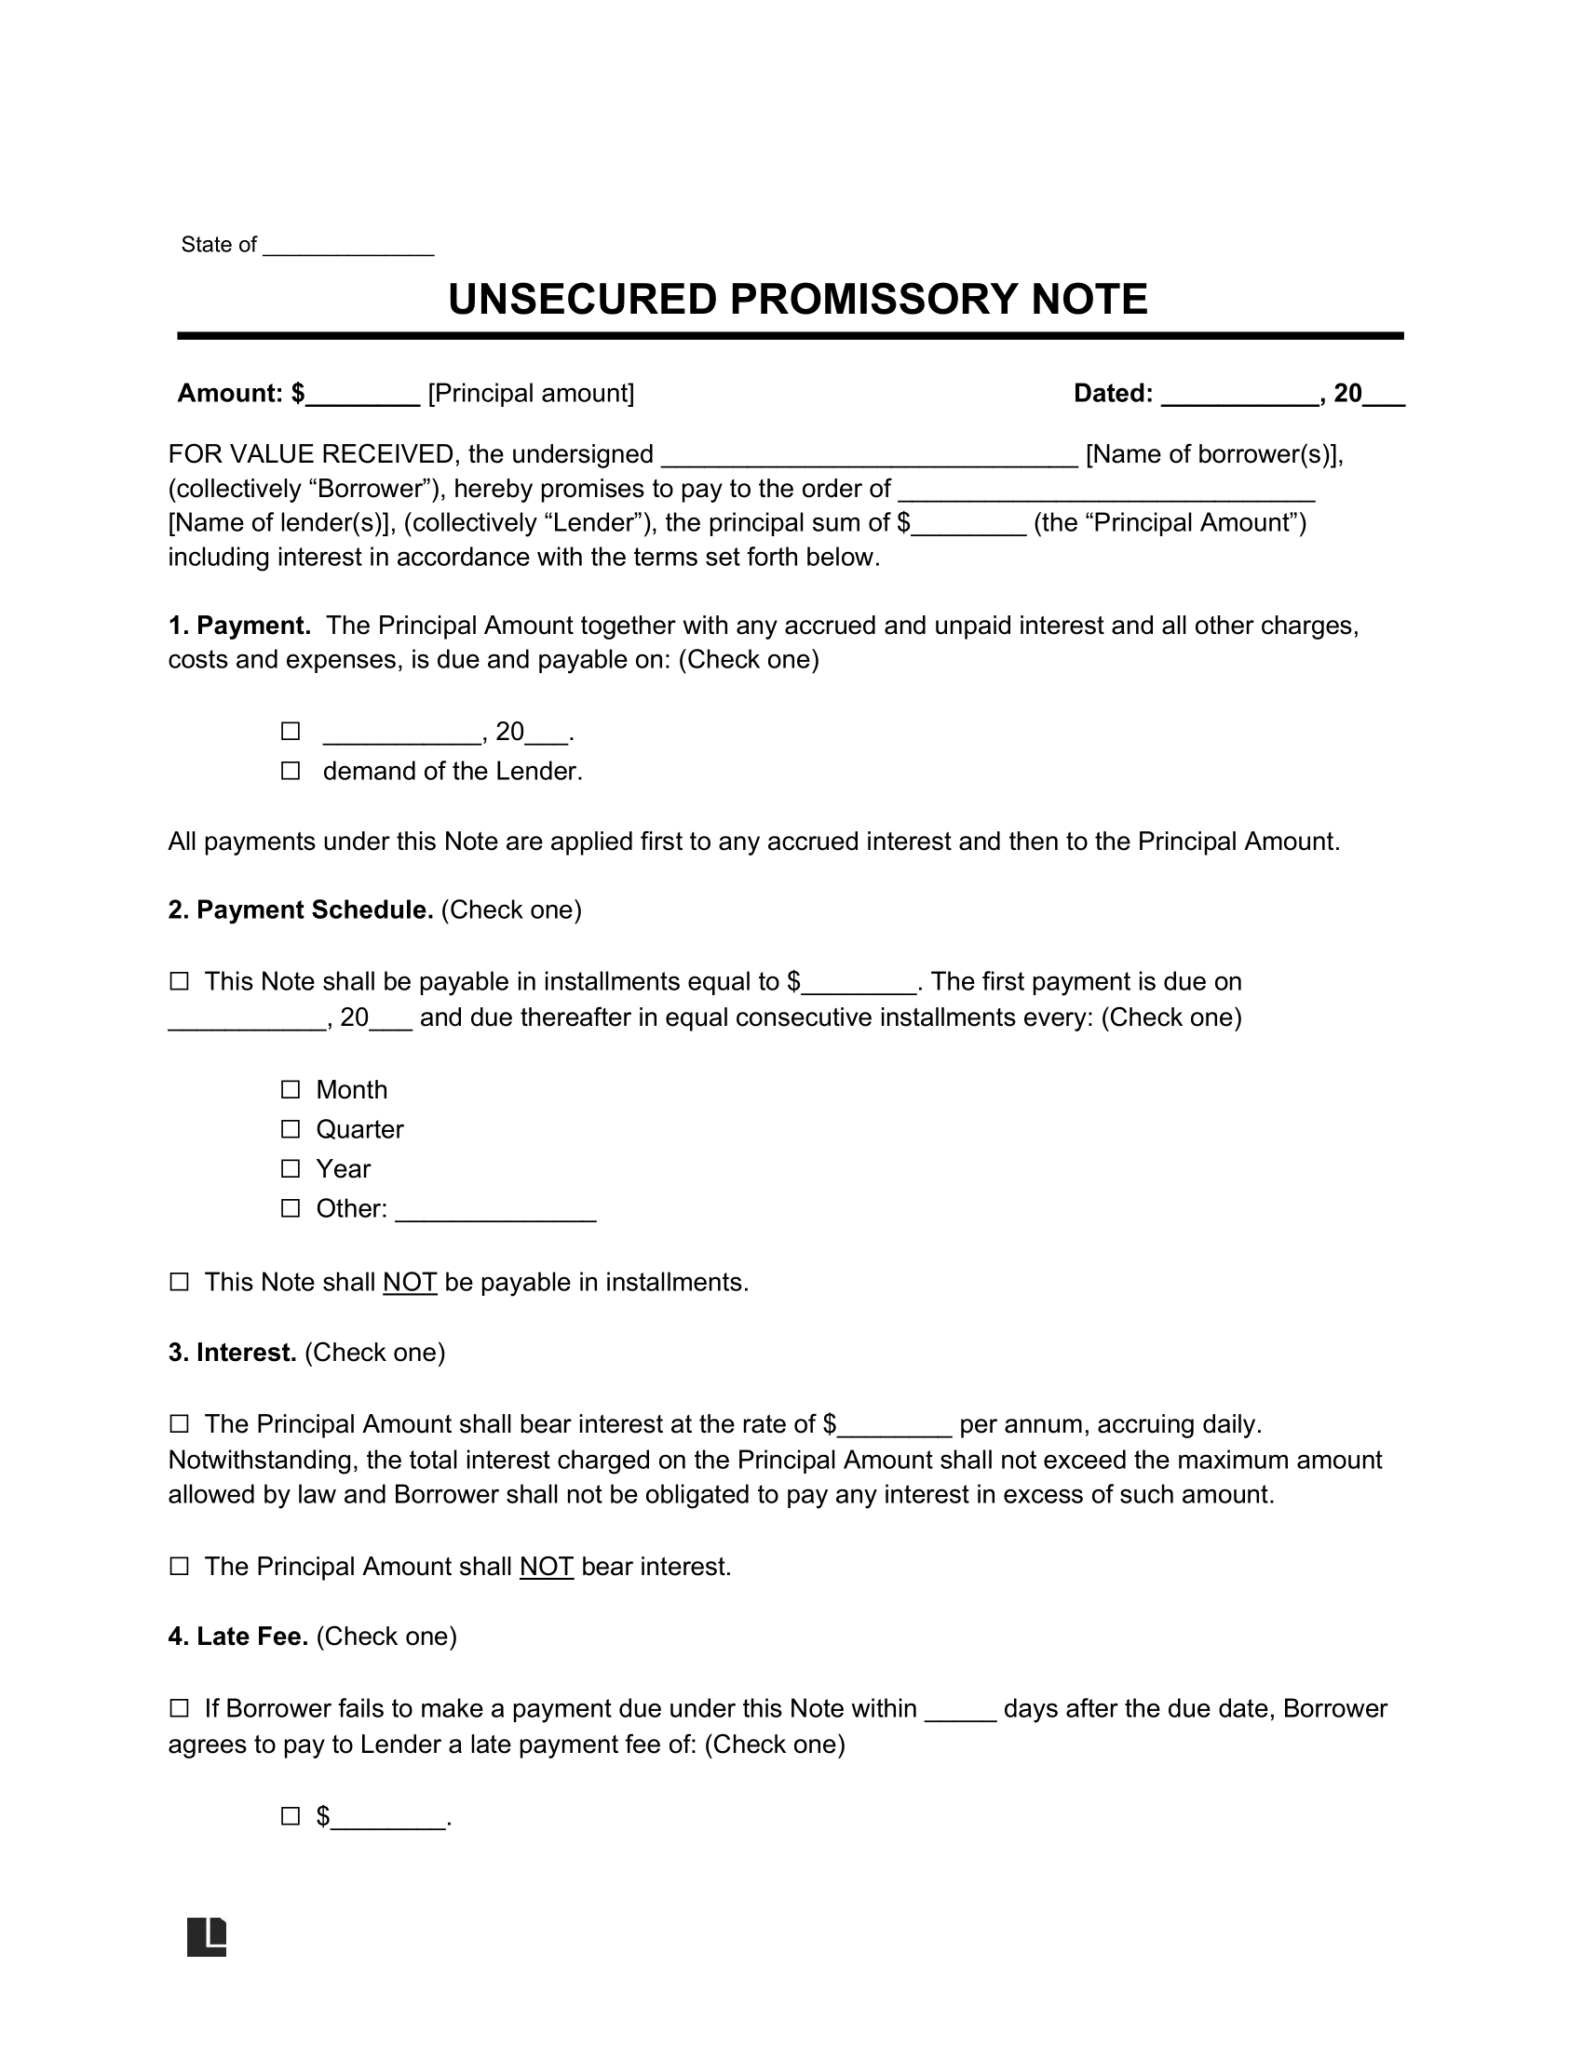 Free Unsecured Promissory Note Template | PDF & Word